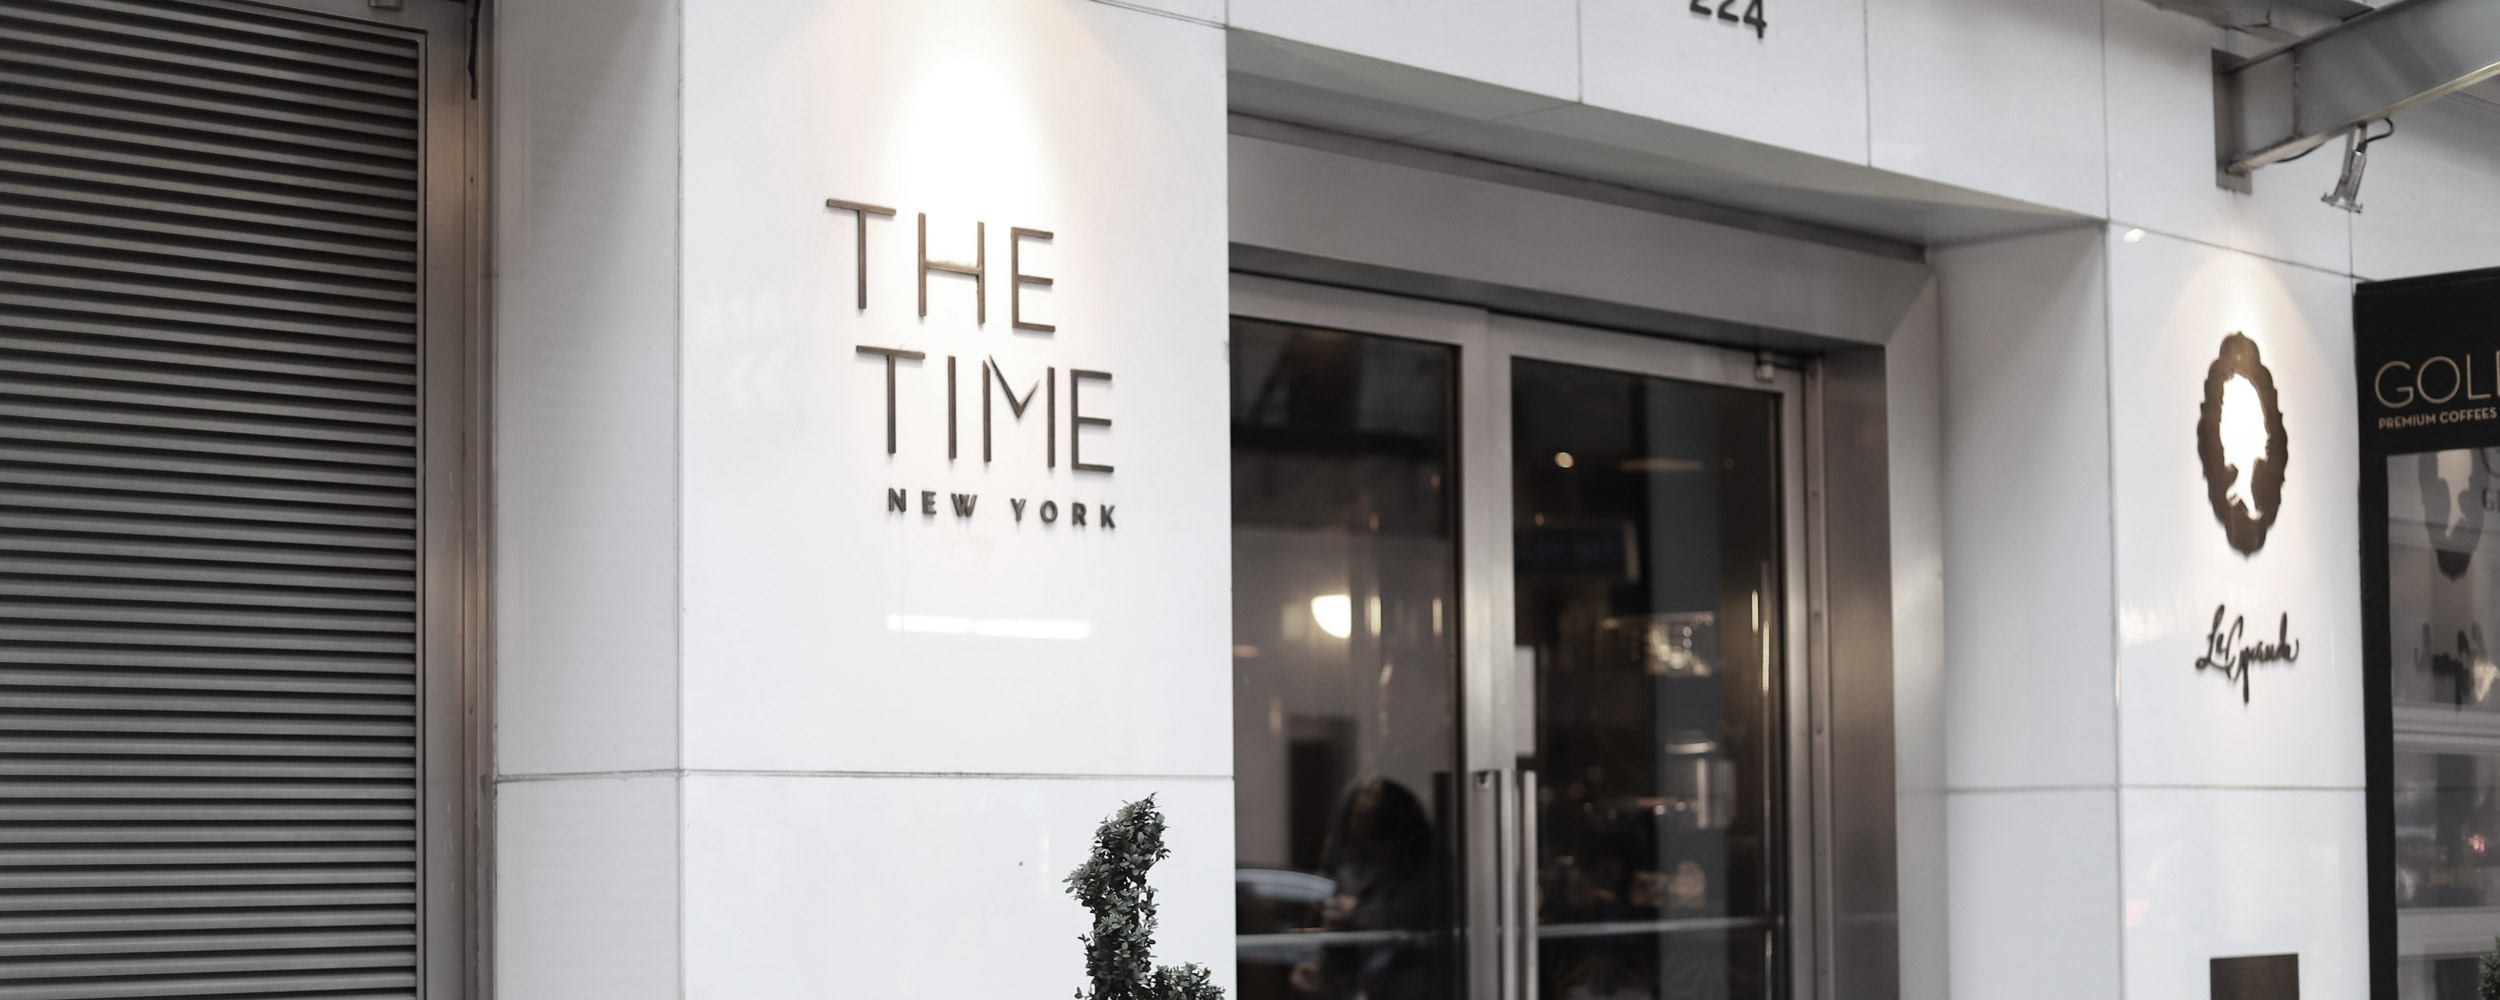 the time new York